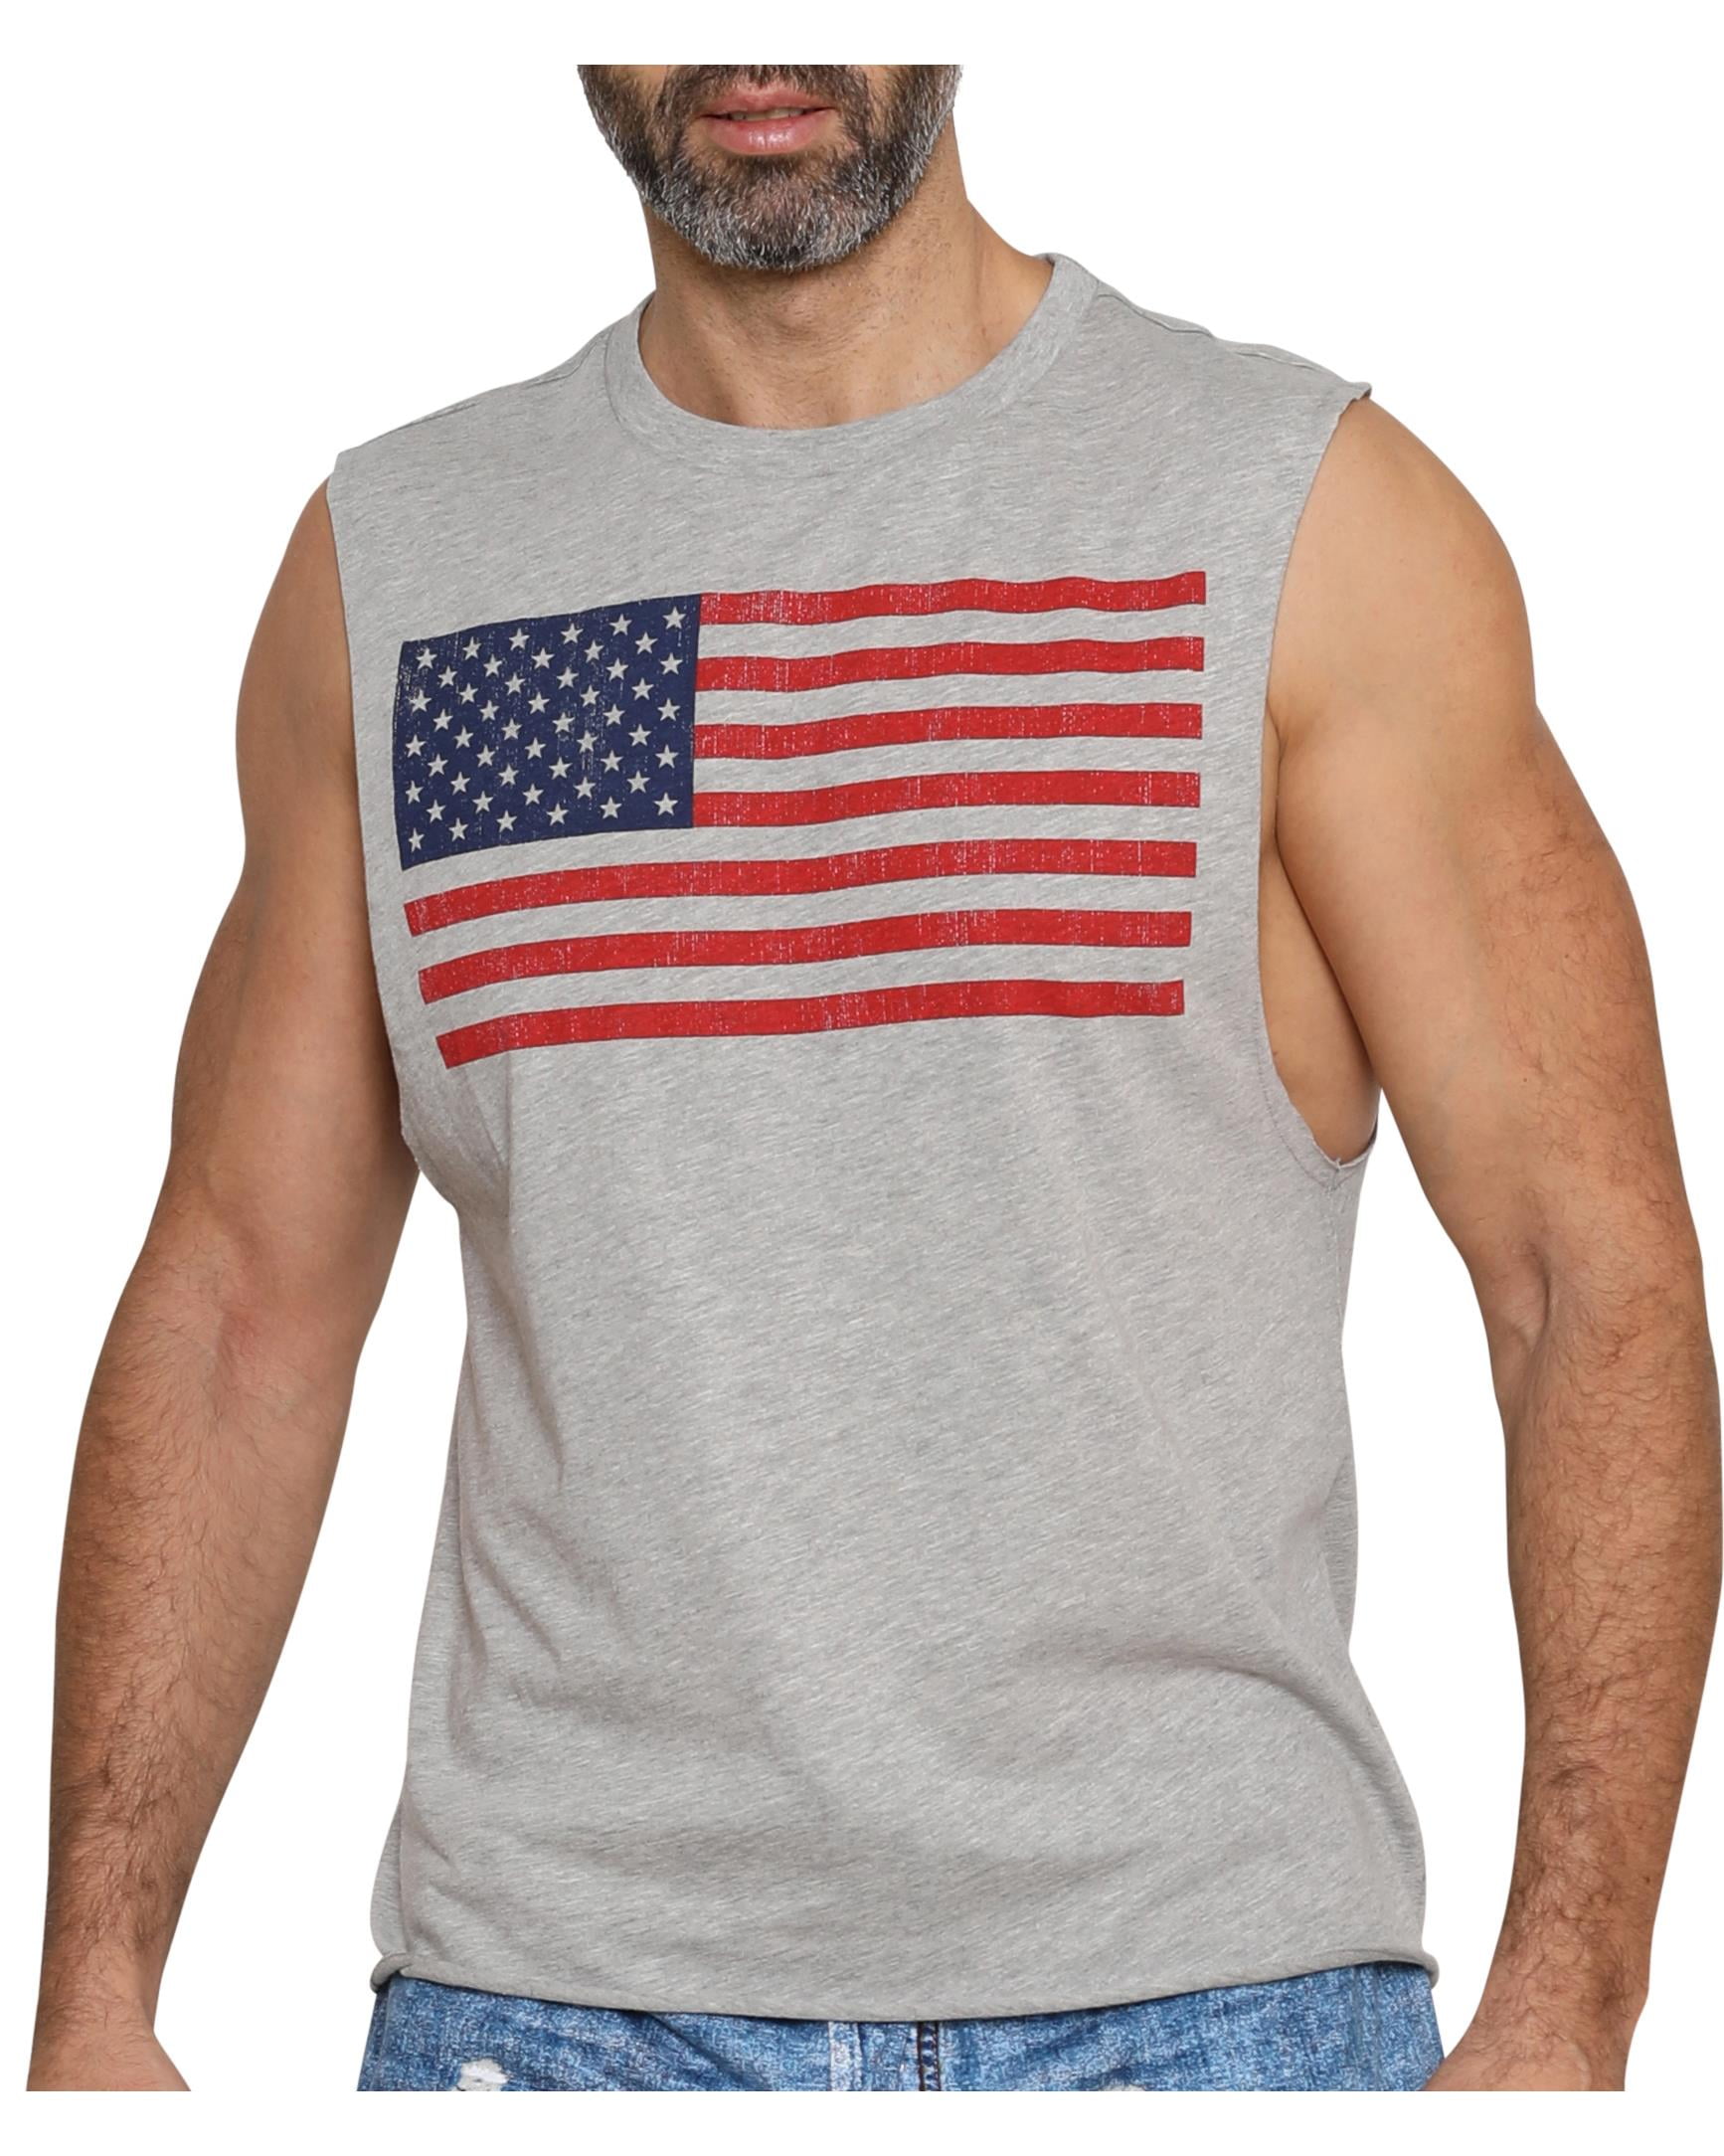 Fourth of July Tank Top for Men Summer Graphic American Flag Tank Top Workout Running Muscle Tank Top Beach Wear Vest